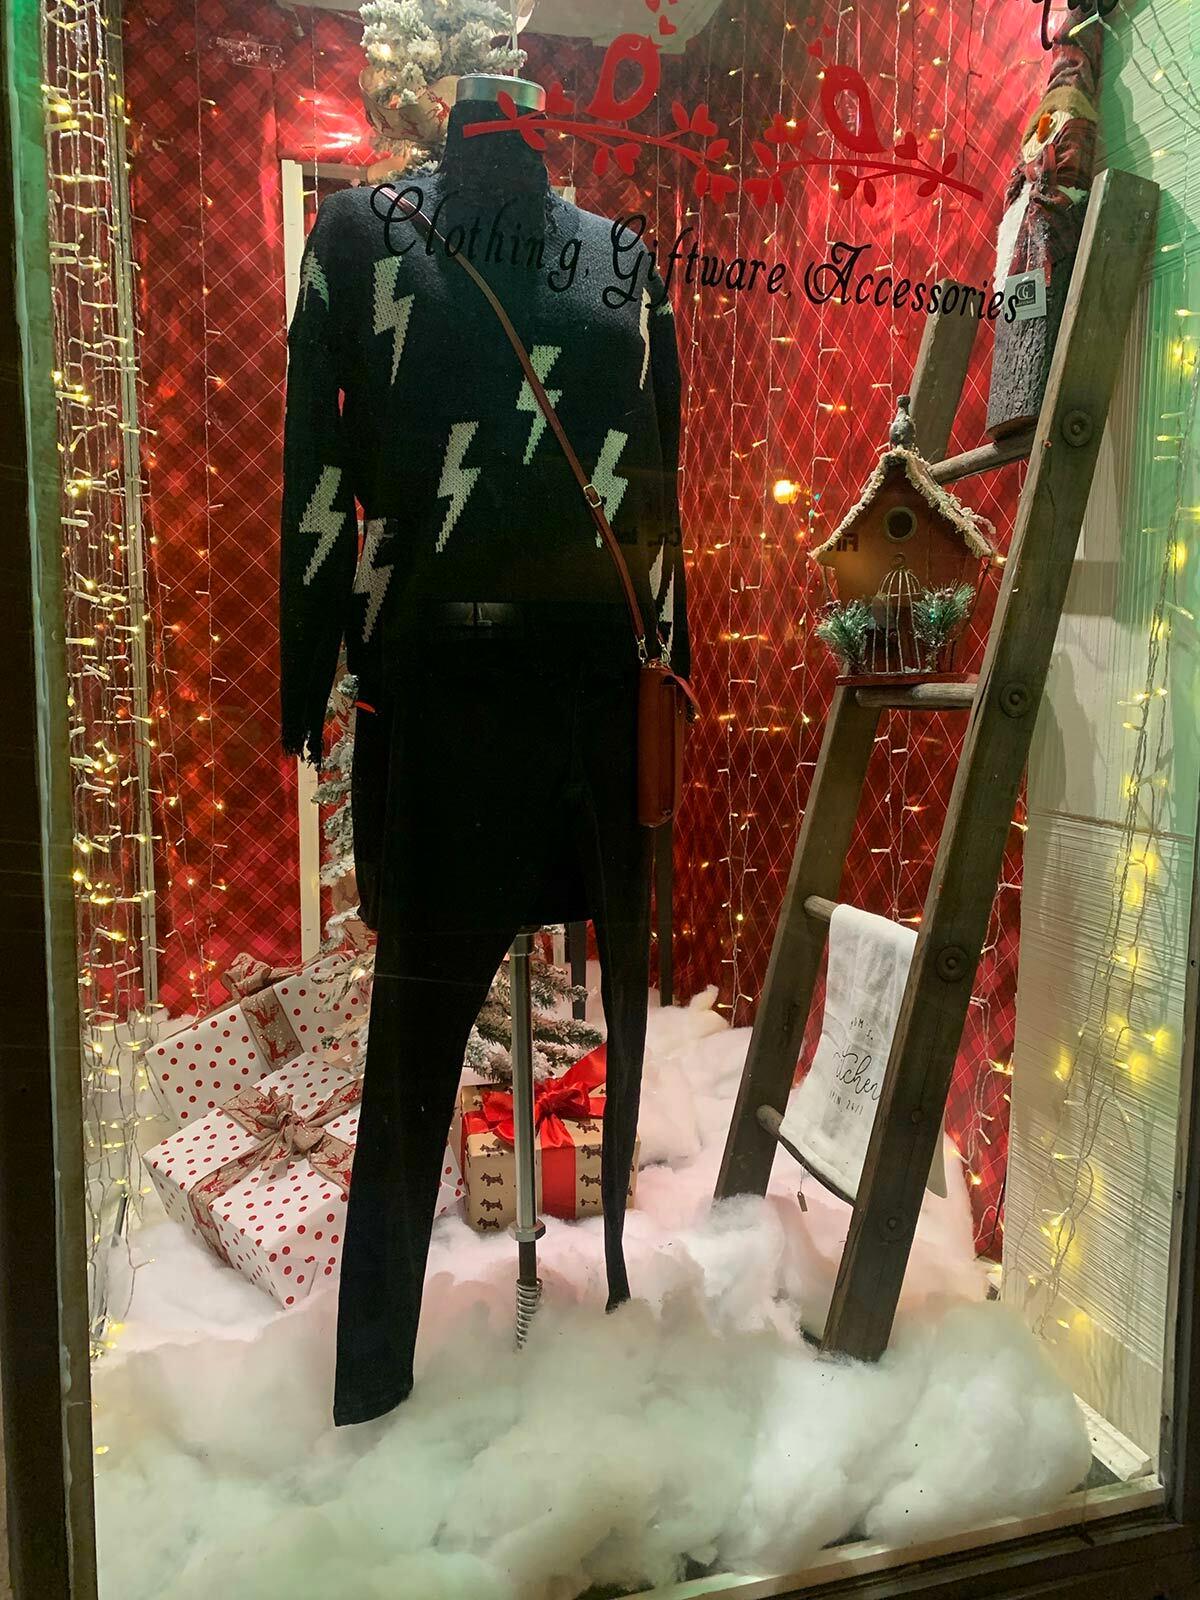 A holiday display in one of On a Lark’s windows.